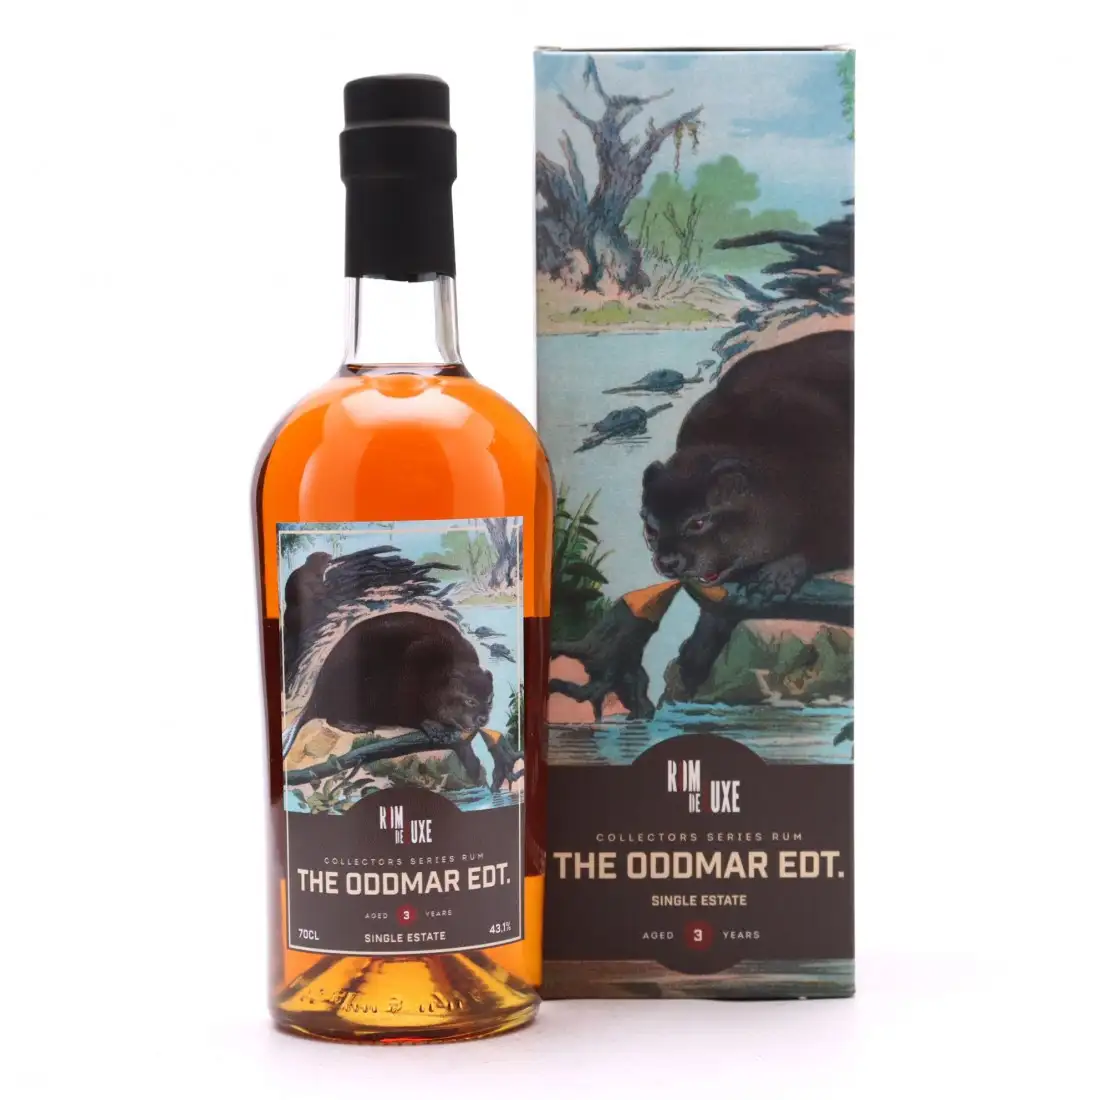 Image of the front of the bottle of the rum Collectors Series No. 4 The Oddmar Edition